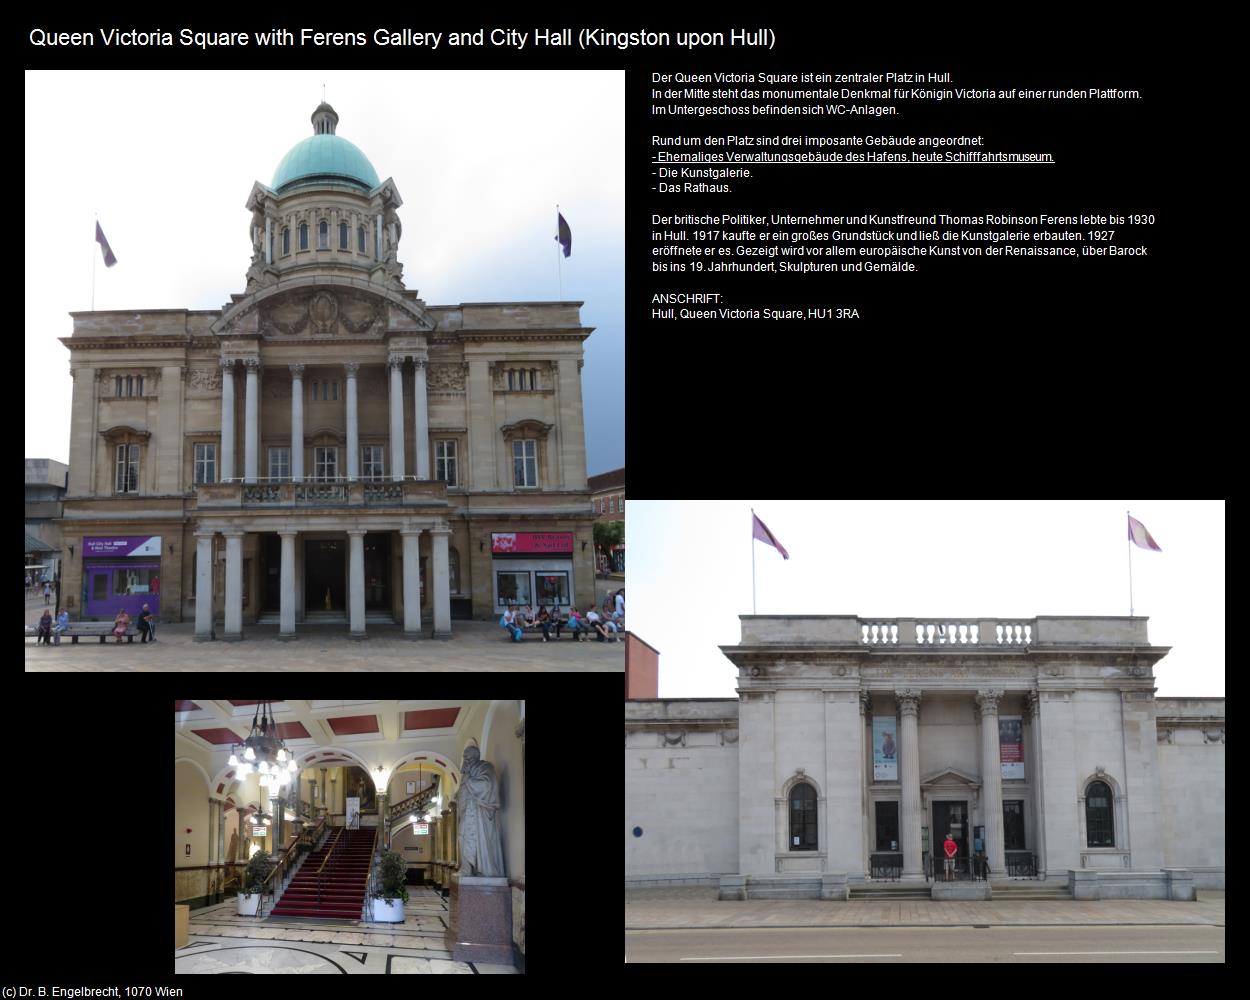 Queen Victoria Square, Ferens Gallery, City Hall  (Kingston upon Hull, England) in Kulturatlas-ENGLAND und WALES(c)B.Engelbrecht